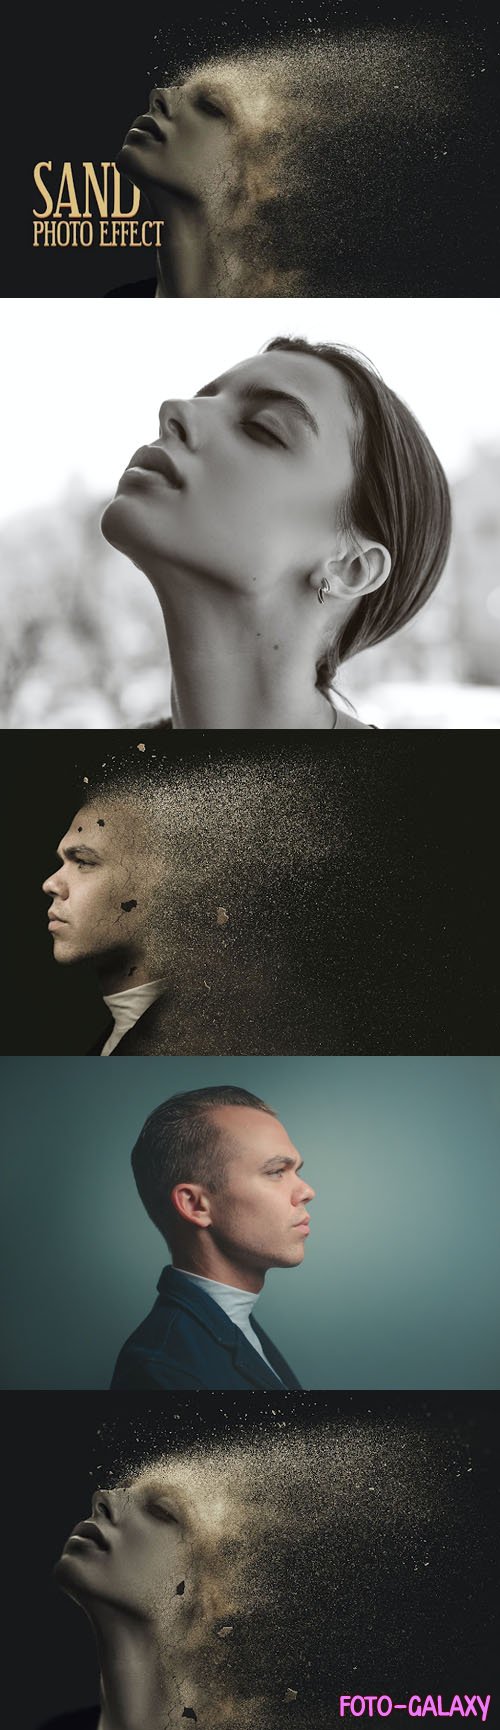 Awesome Sand Dispersion Effects for Photoshop